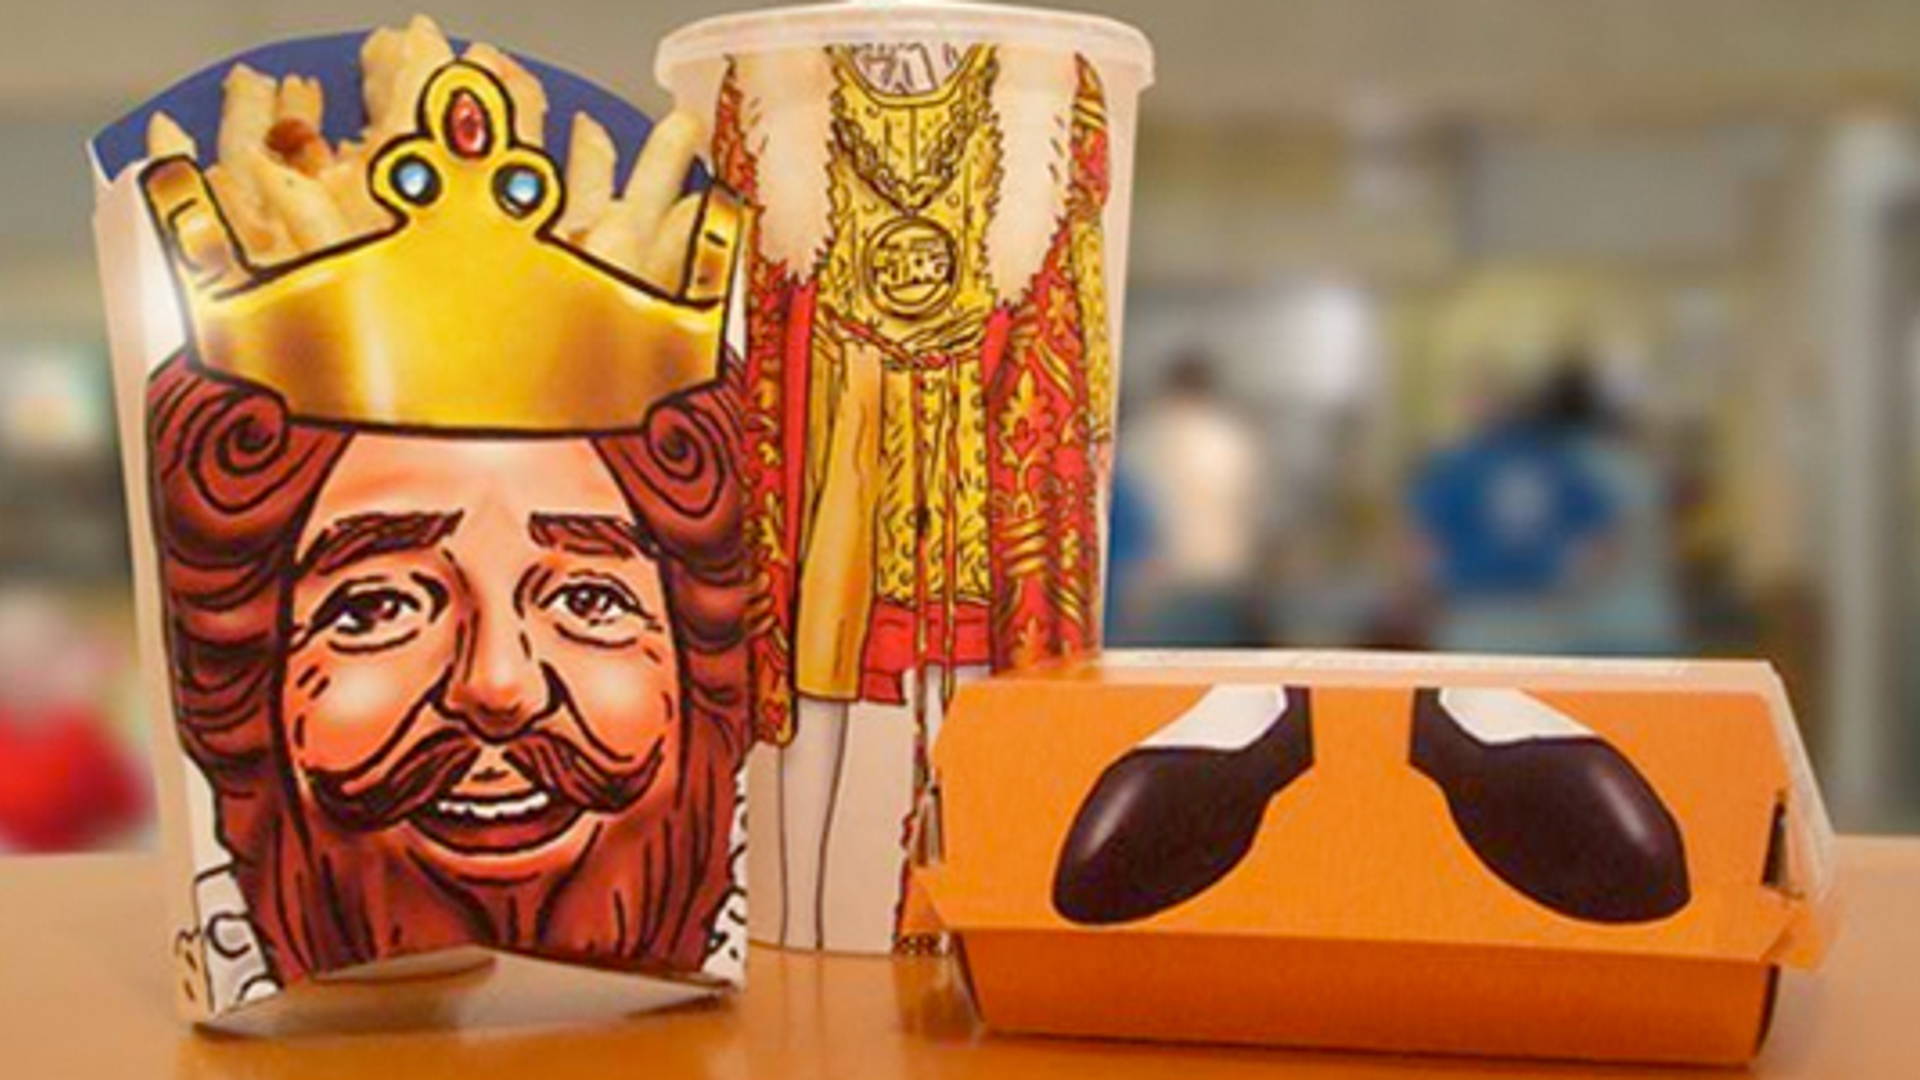 Featured image for "Create Your Own King" Concept Packaging